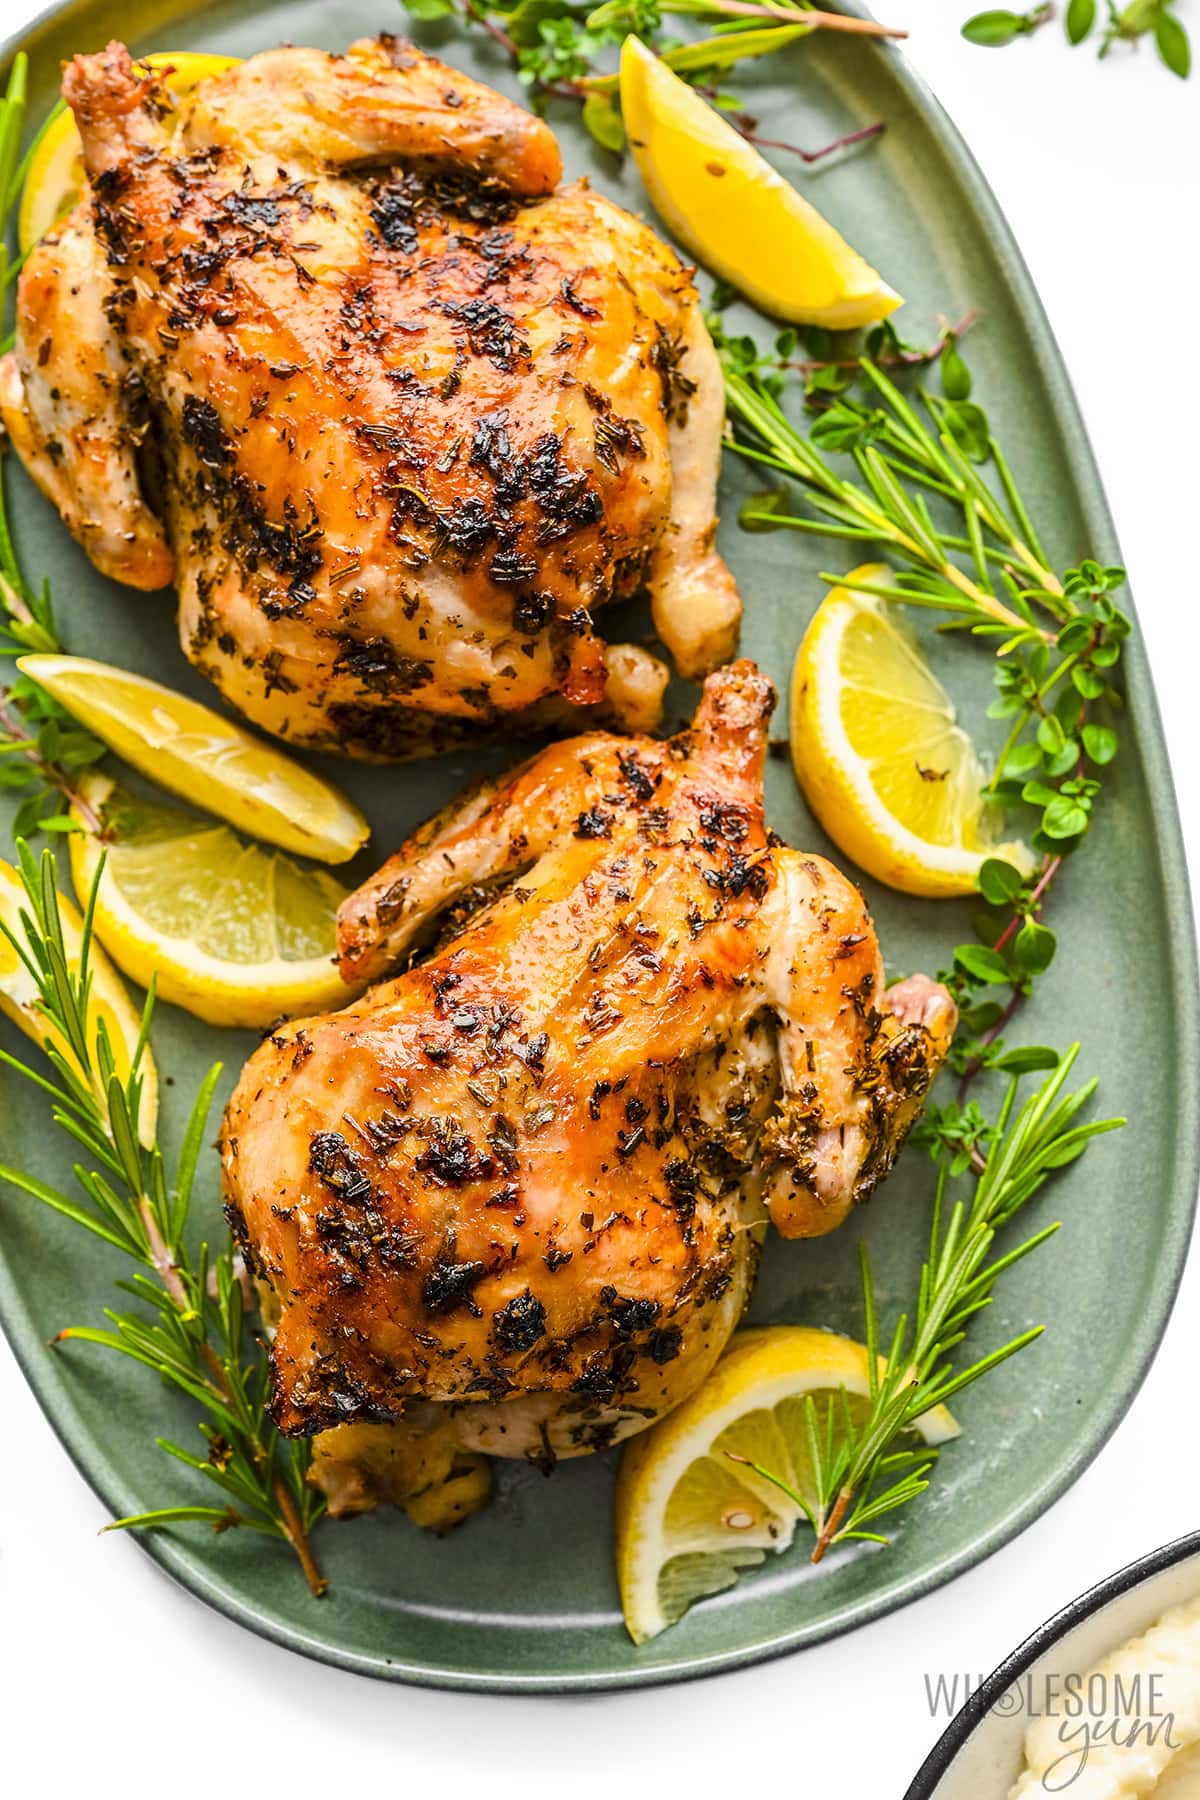 Cornish hen is served on a plate with lemon wedges and fresh herbs.